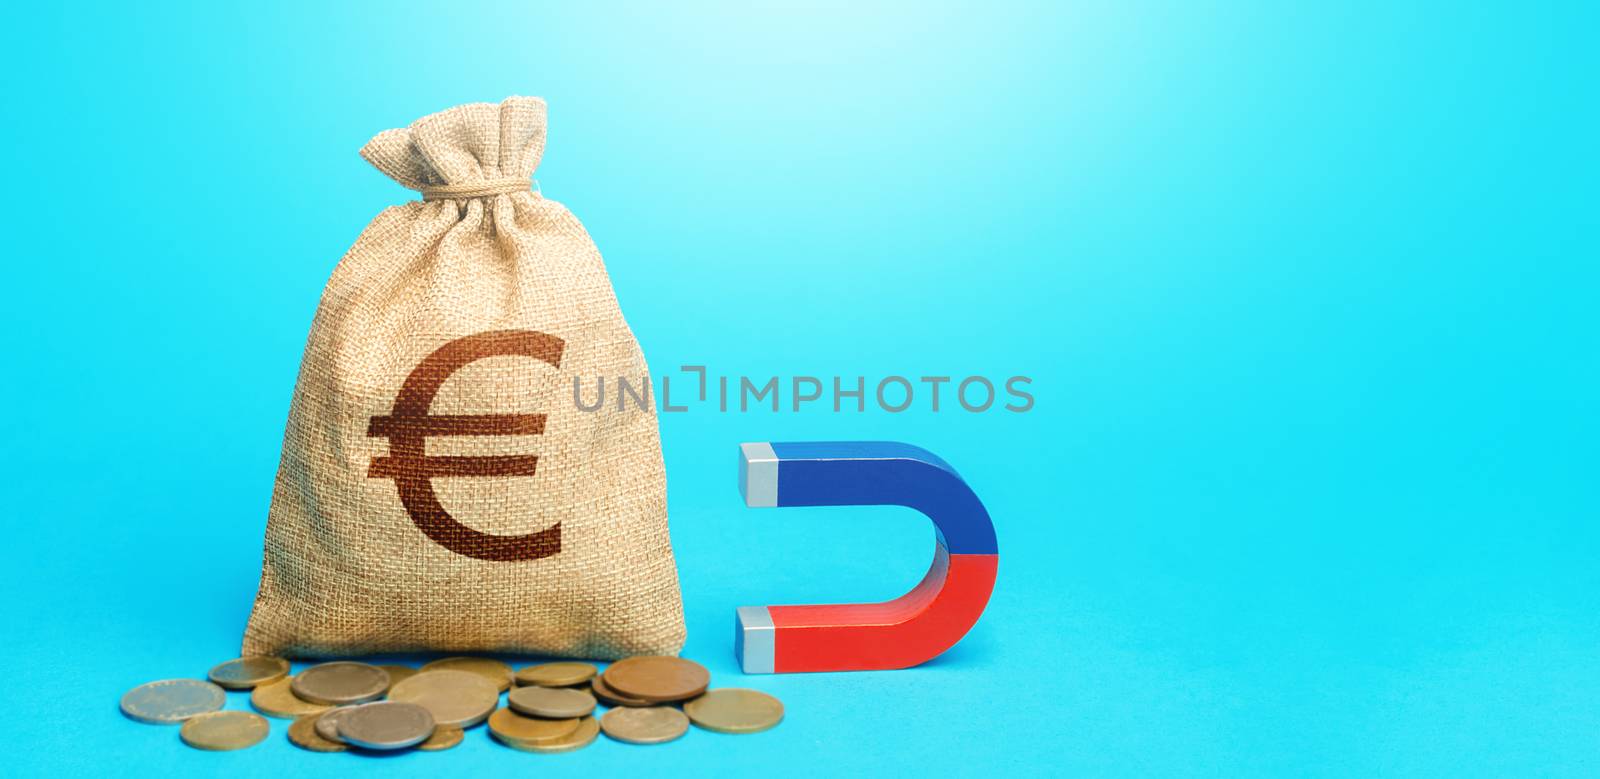 Euro money bag and magnet. Raising funds and investments in business projects and startups. Tax collection. Take part in tenders. Accumulation and attraction of capital. Money laundering by iLixe48